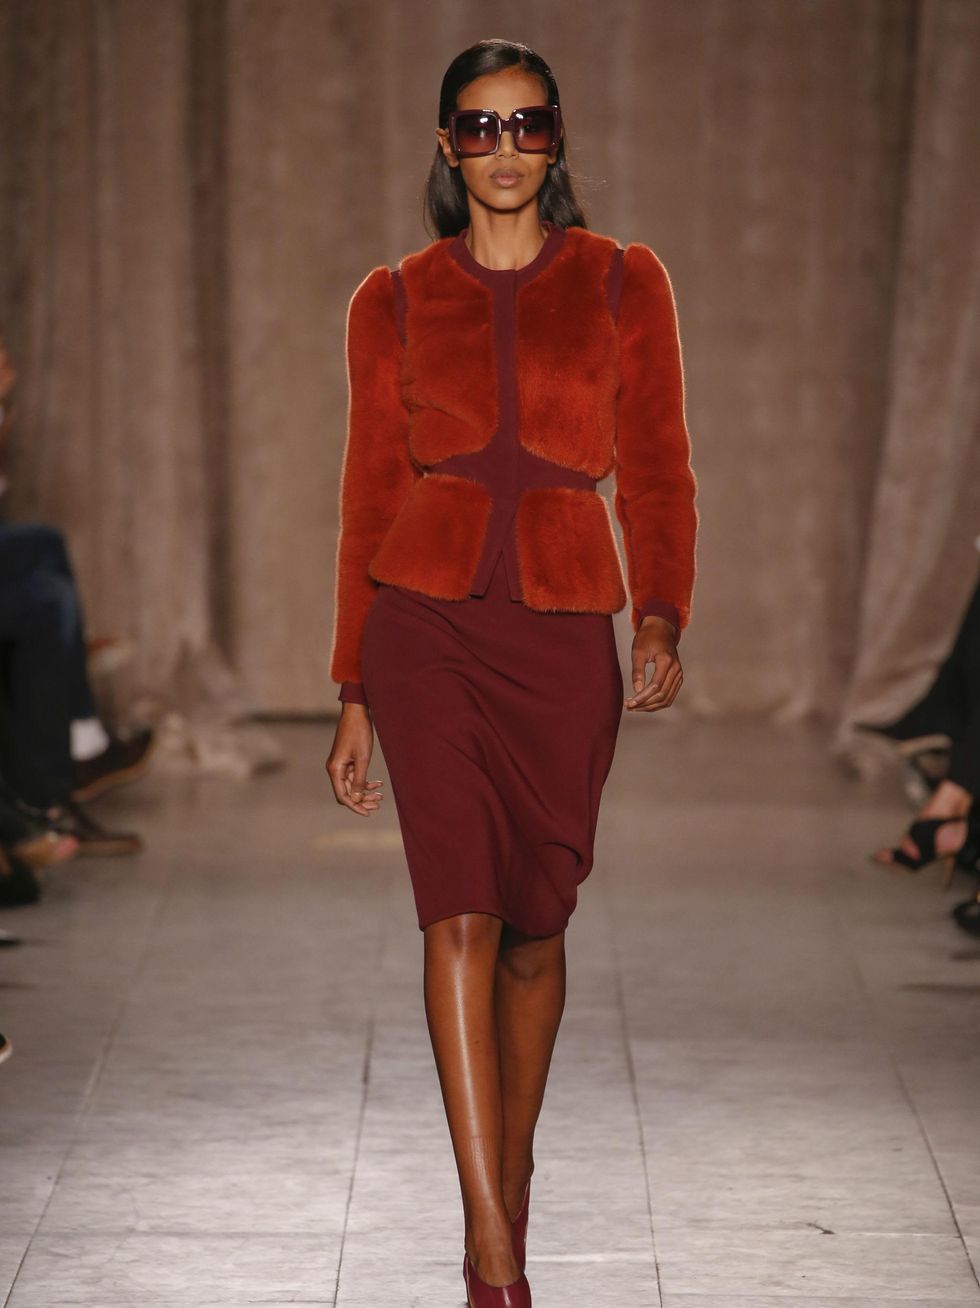 Suit from Zac Posen fall 2015 collection